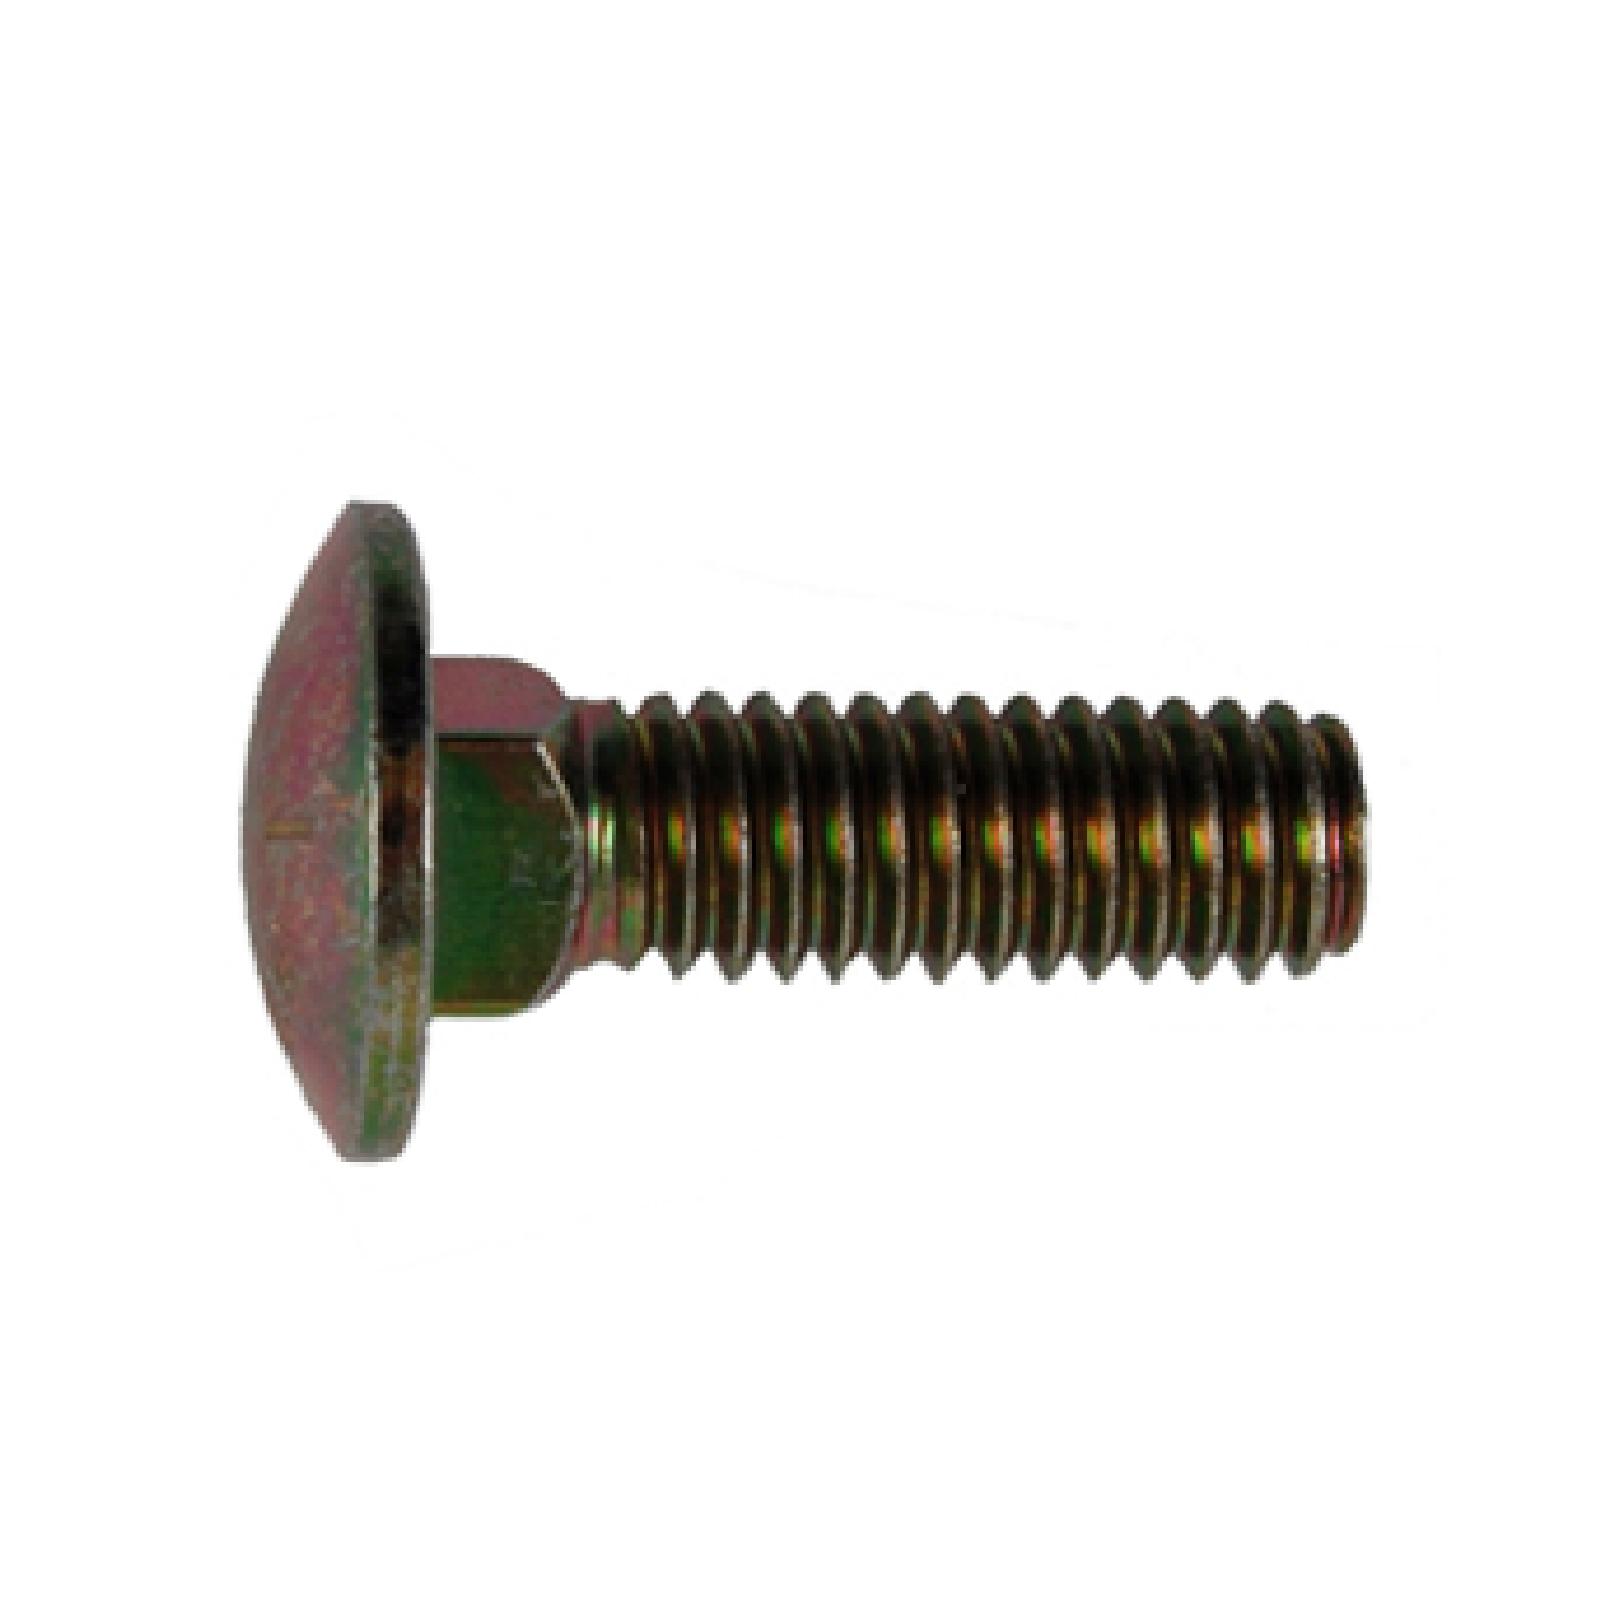 BOLT CARRIAGE 5/16 part# 710-0276 by MTD